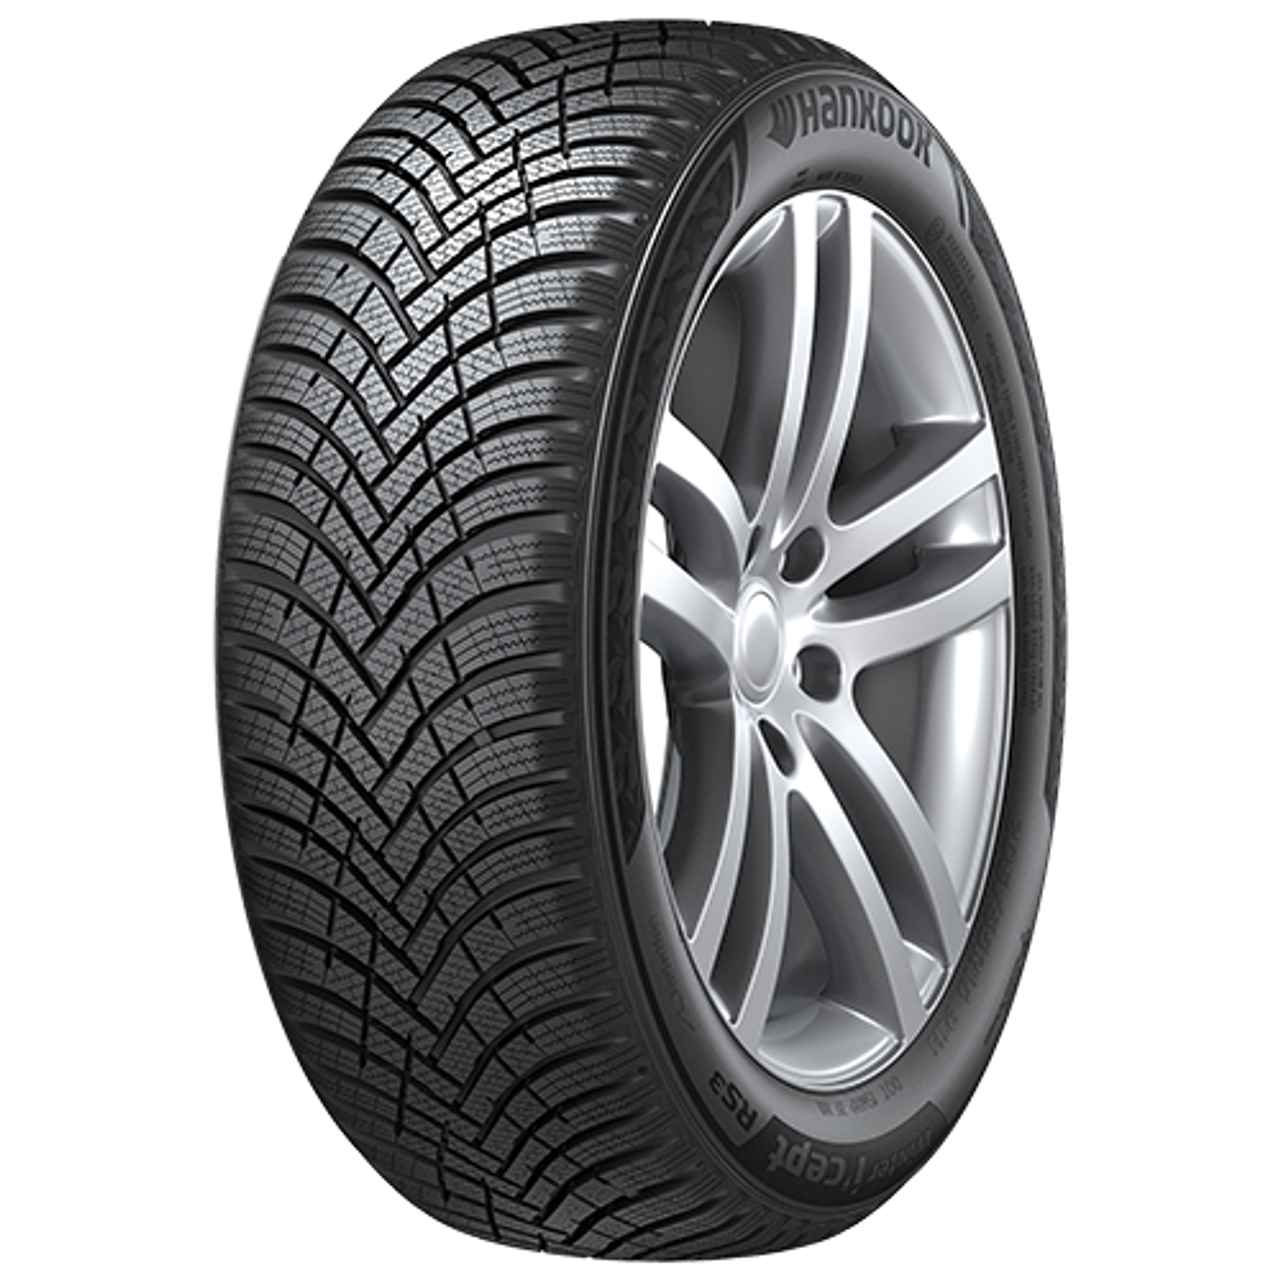 HANKOOK WINTER I*CEPT RS3 185/60R14 82T BSW